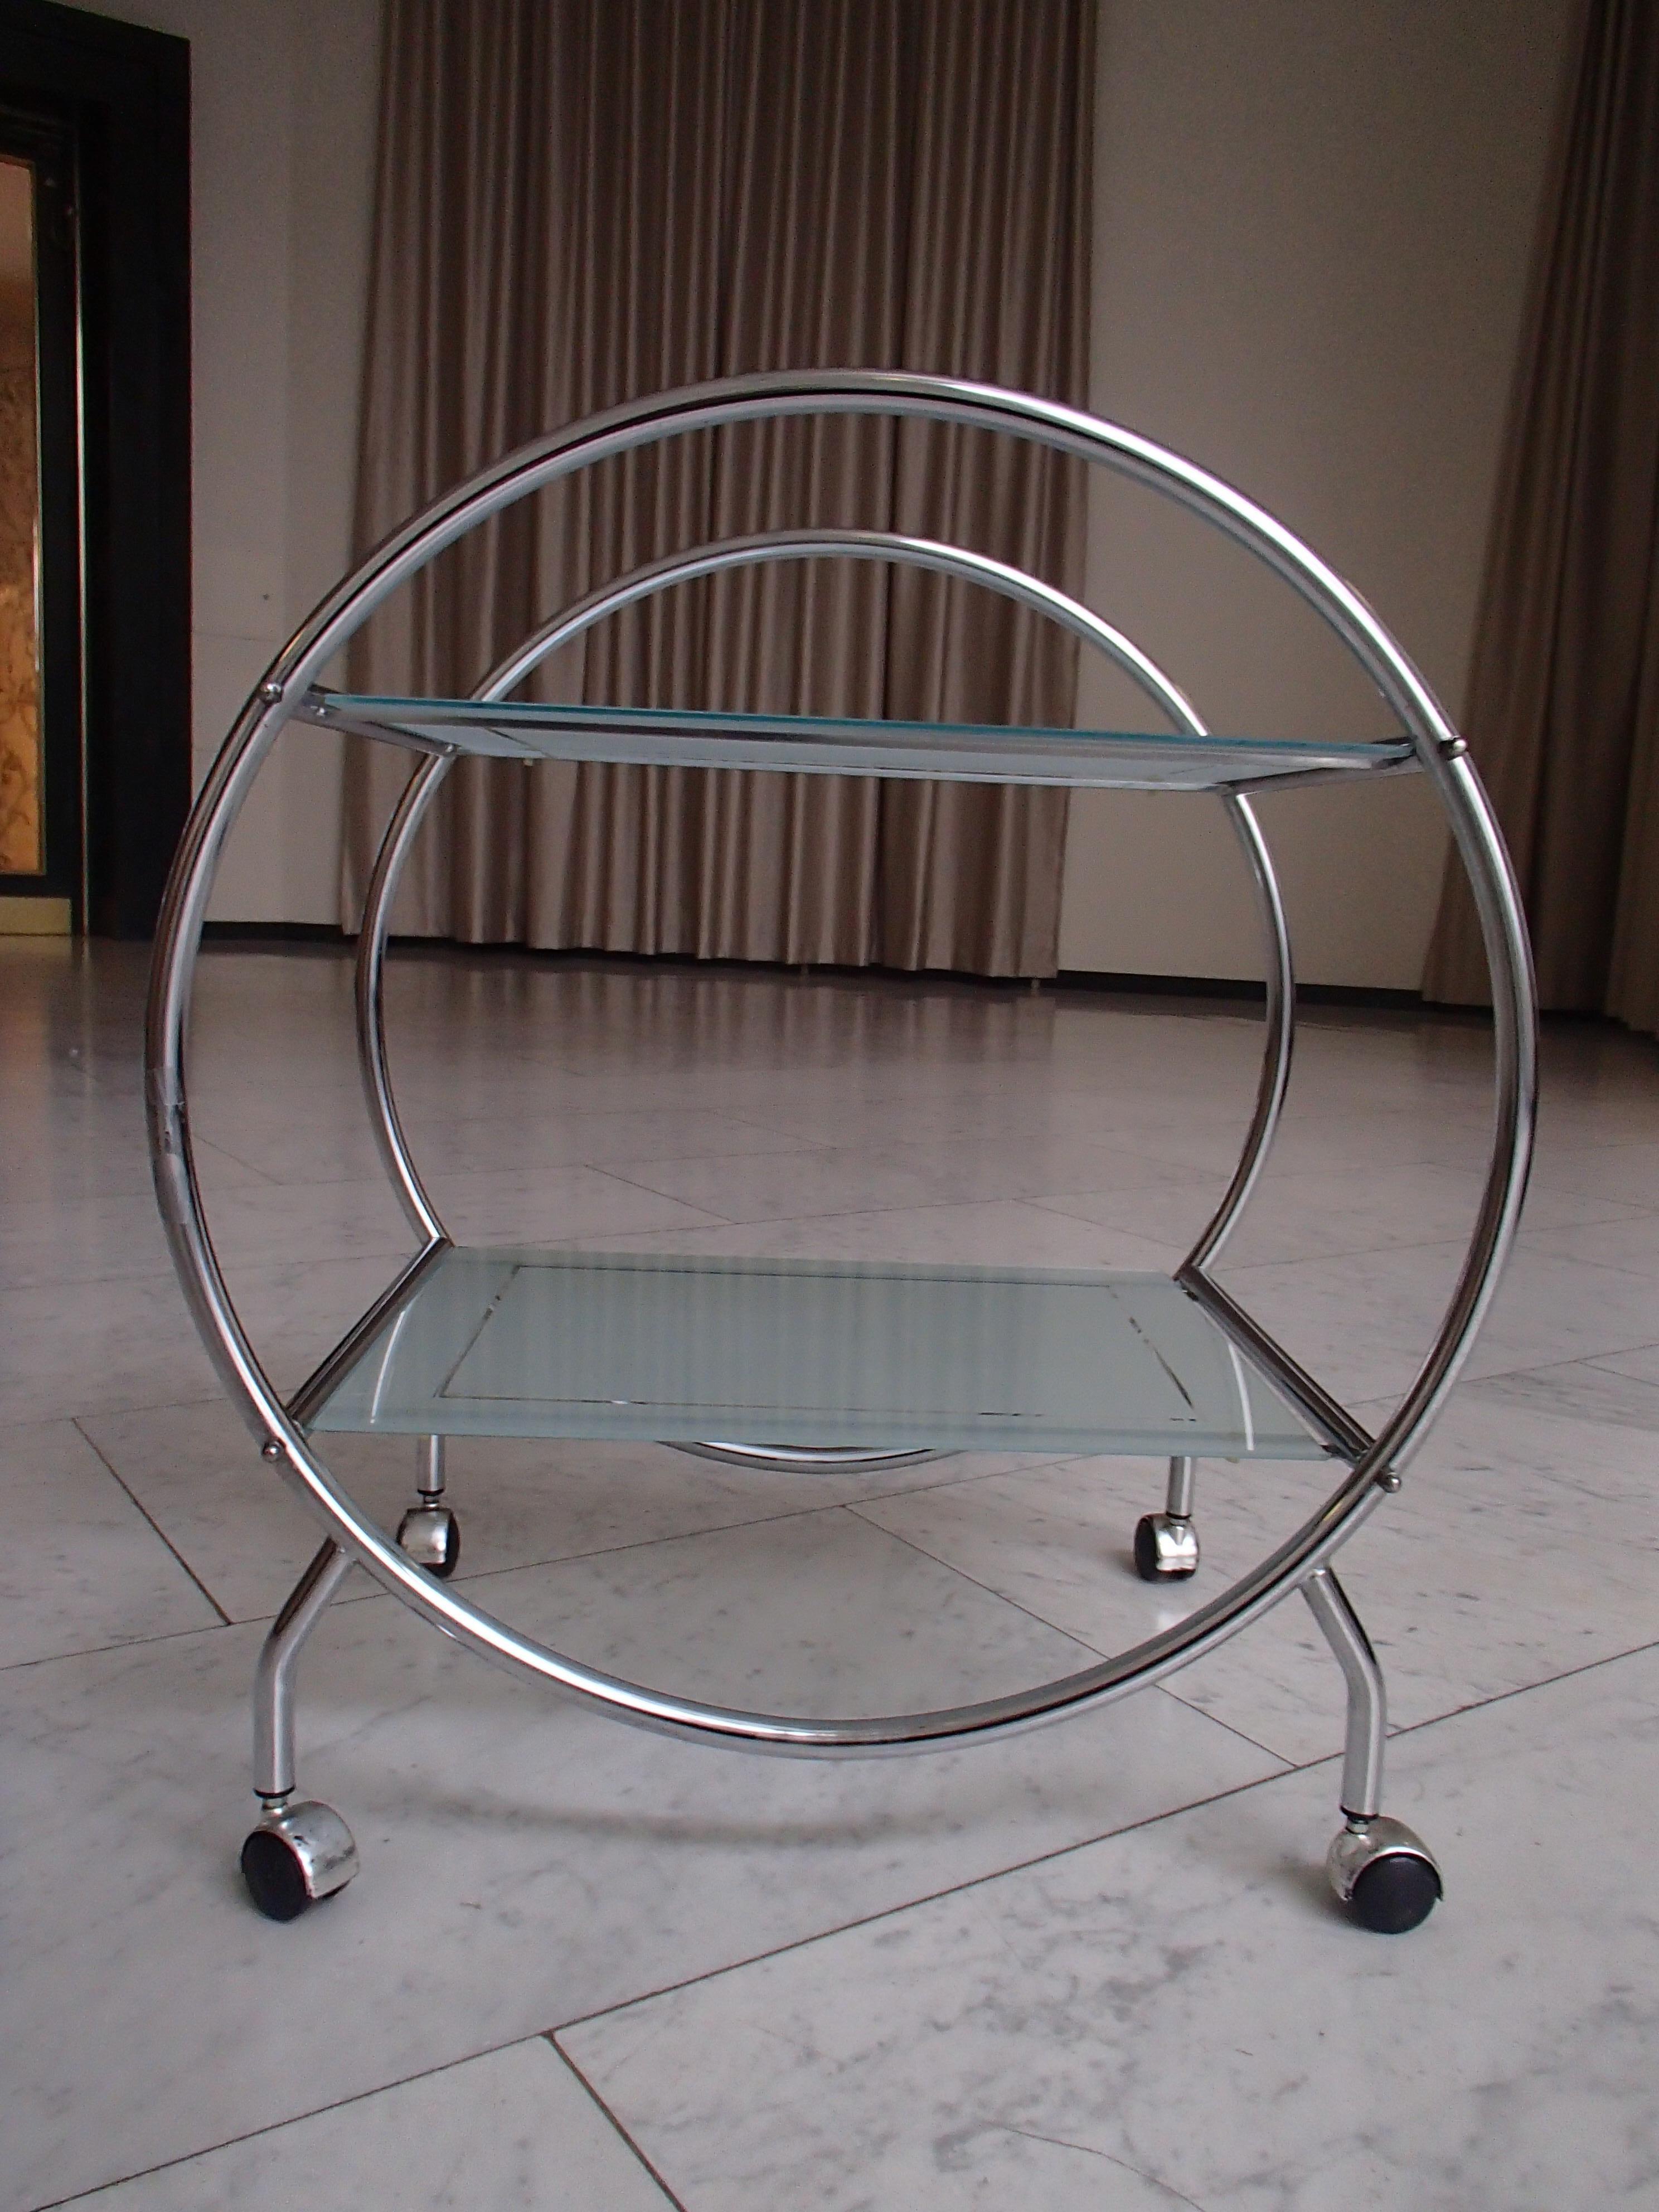 Late 20th Century Round Chrome Art Deco Bar Cart Trolley with 2 Glass Shelves For Sale